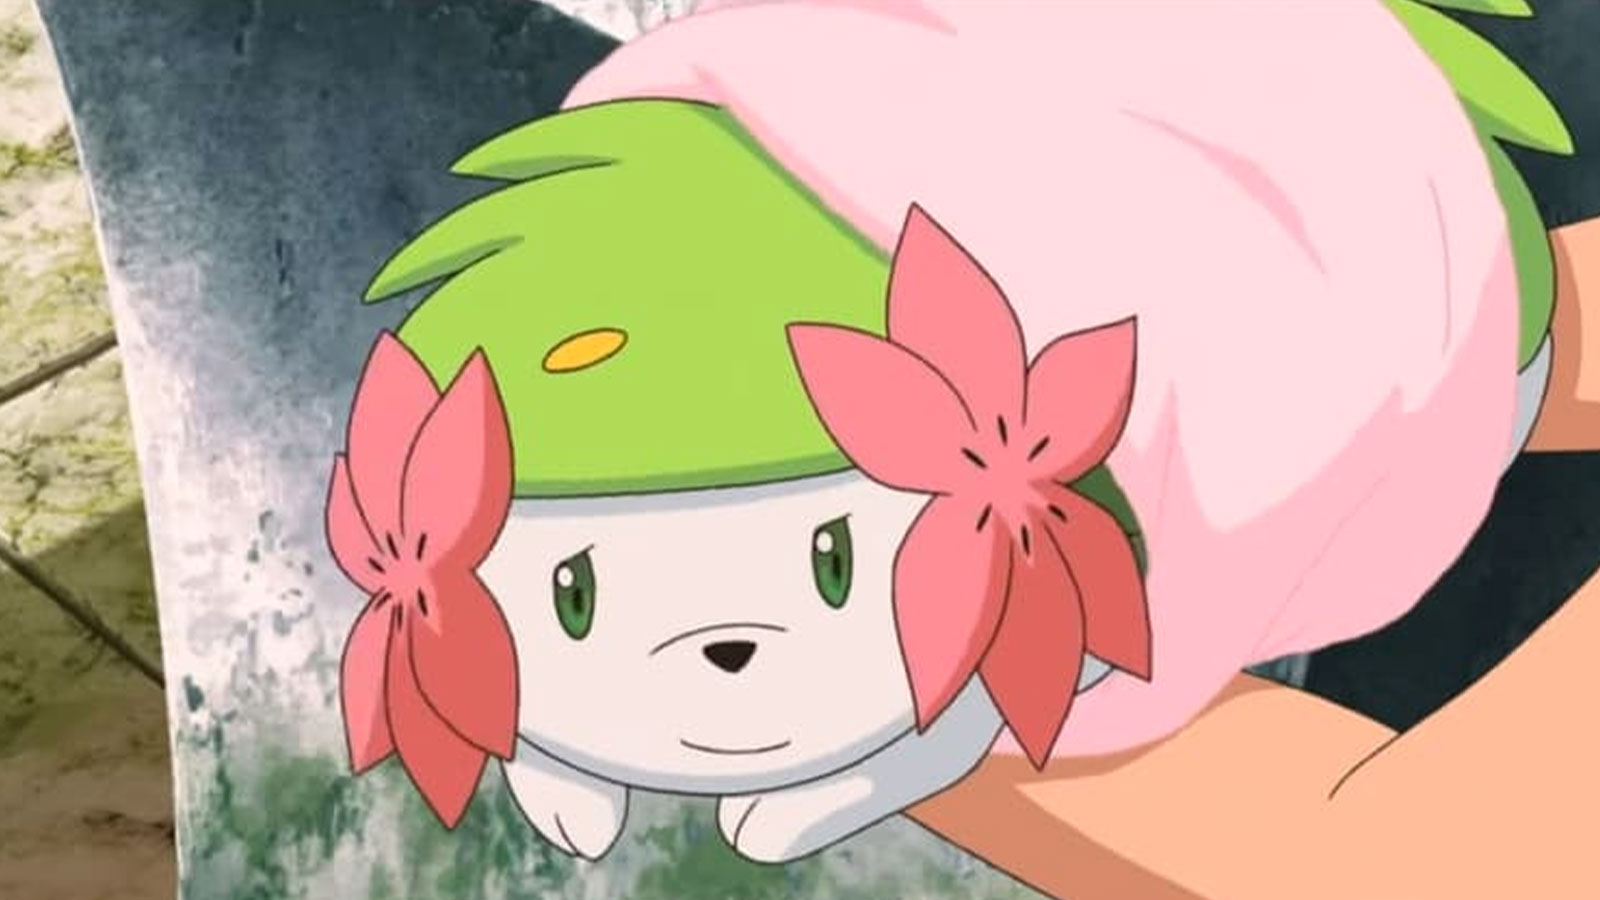 Shaymin's special effect in Pokémon Go attracts players